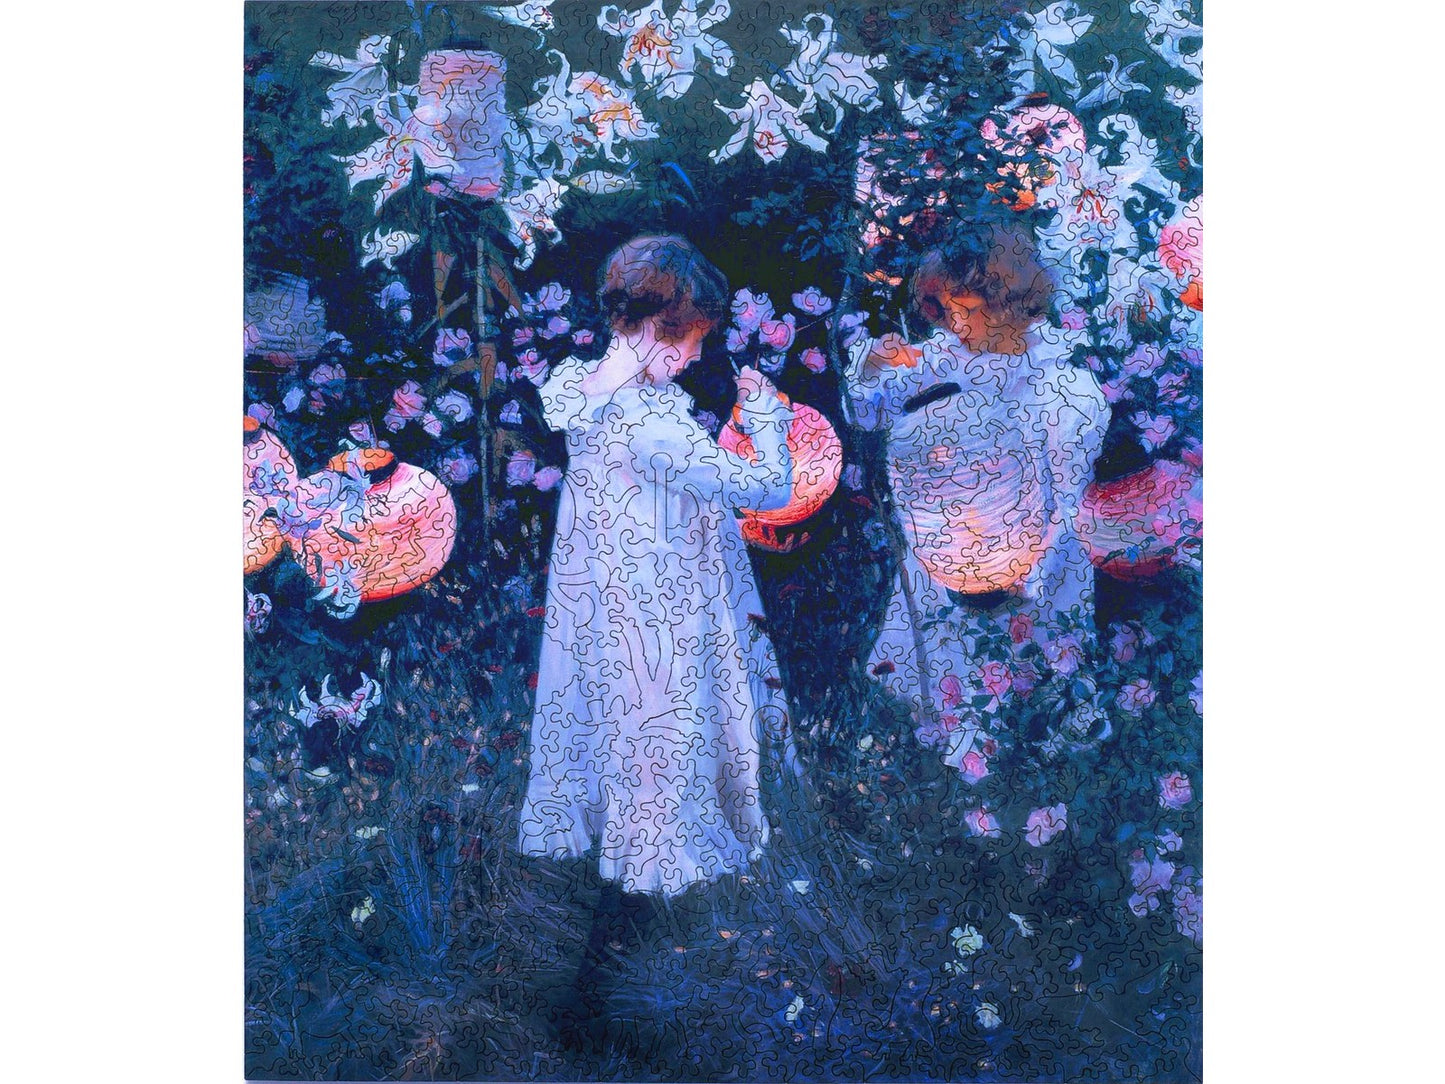 The front of the puzzle, Carnation, Lily, Lily, Rose, which shows two young girls in a garden holding lanterns.